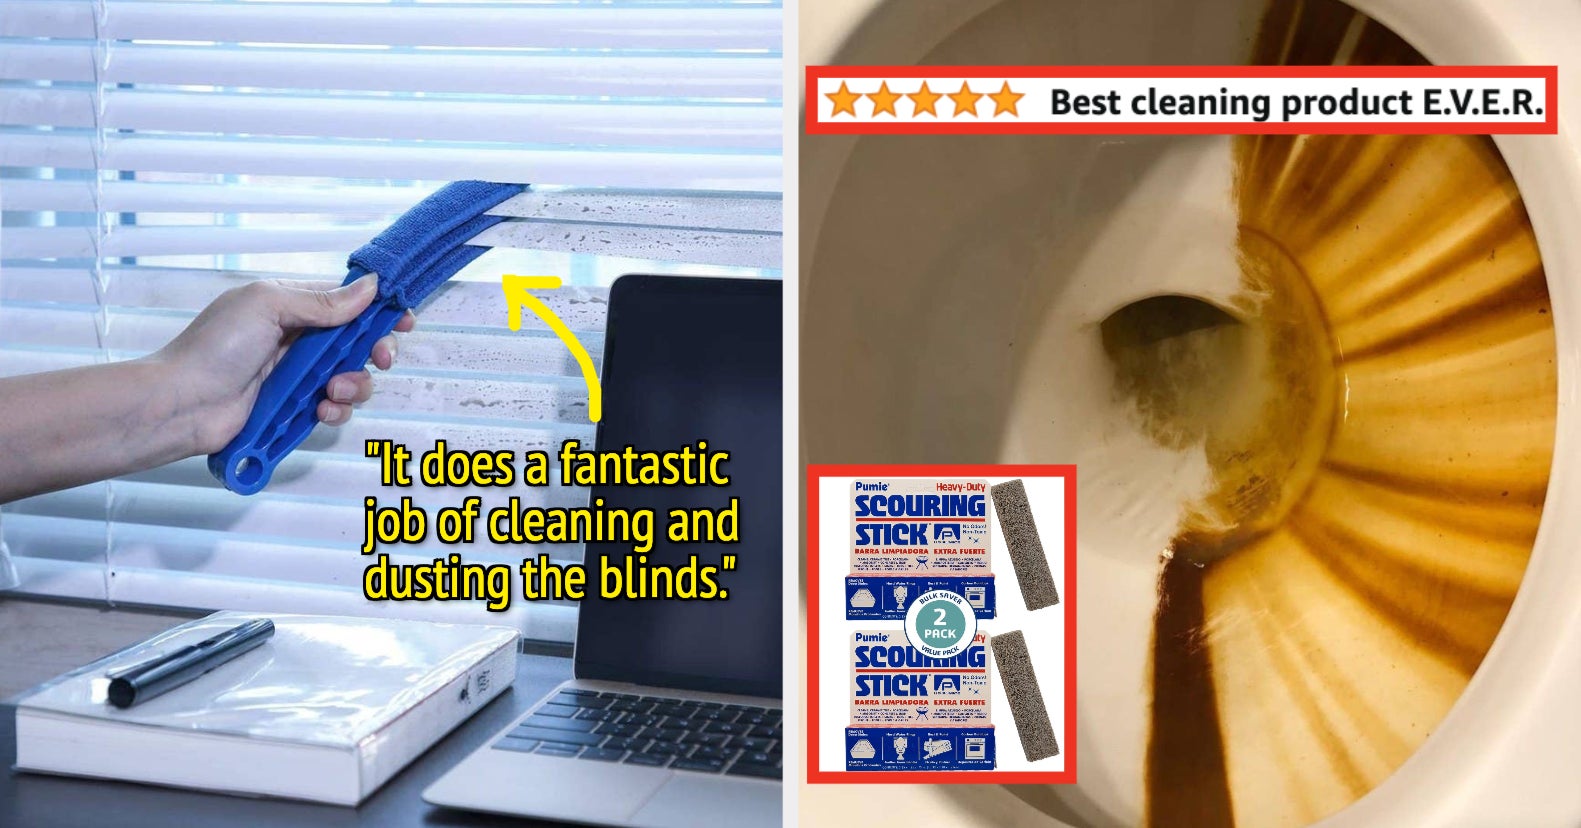 Volcano Master Microwave Steam Cleaner Crud Dirt And Stains